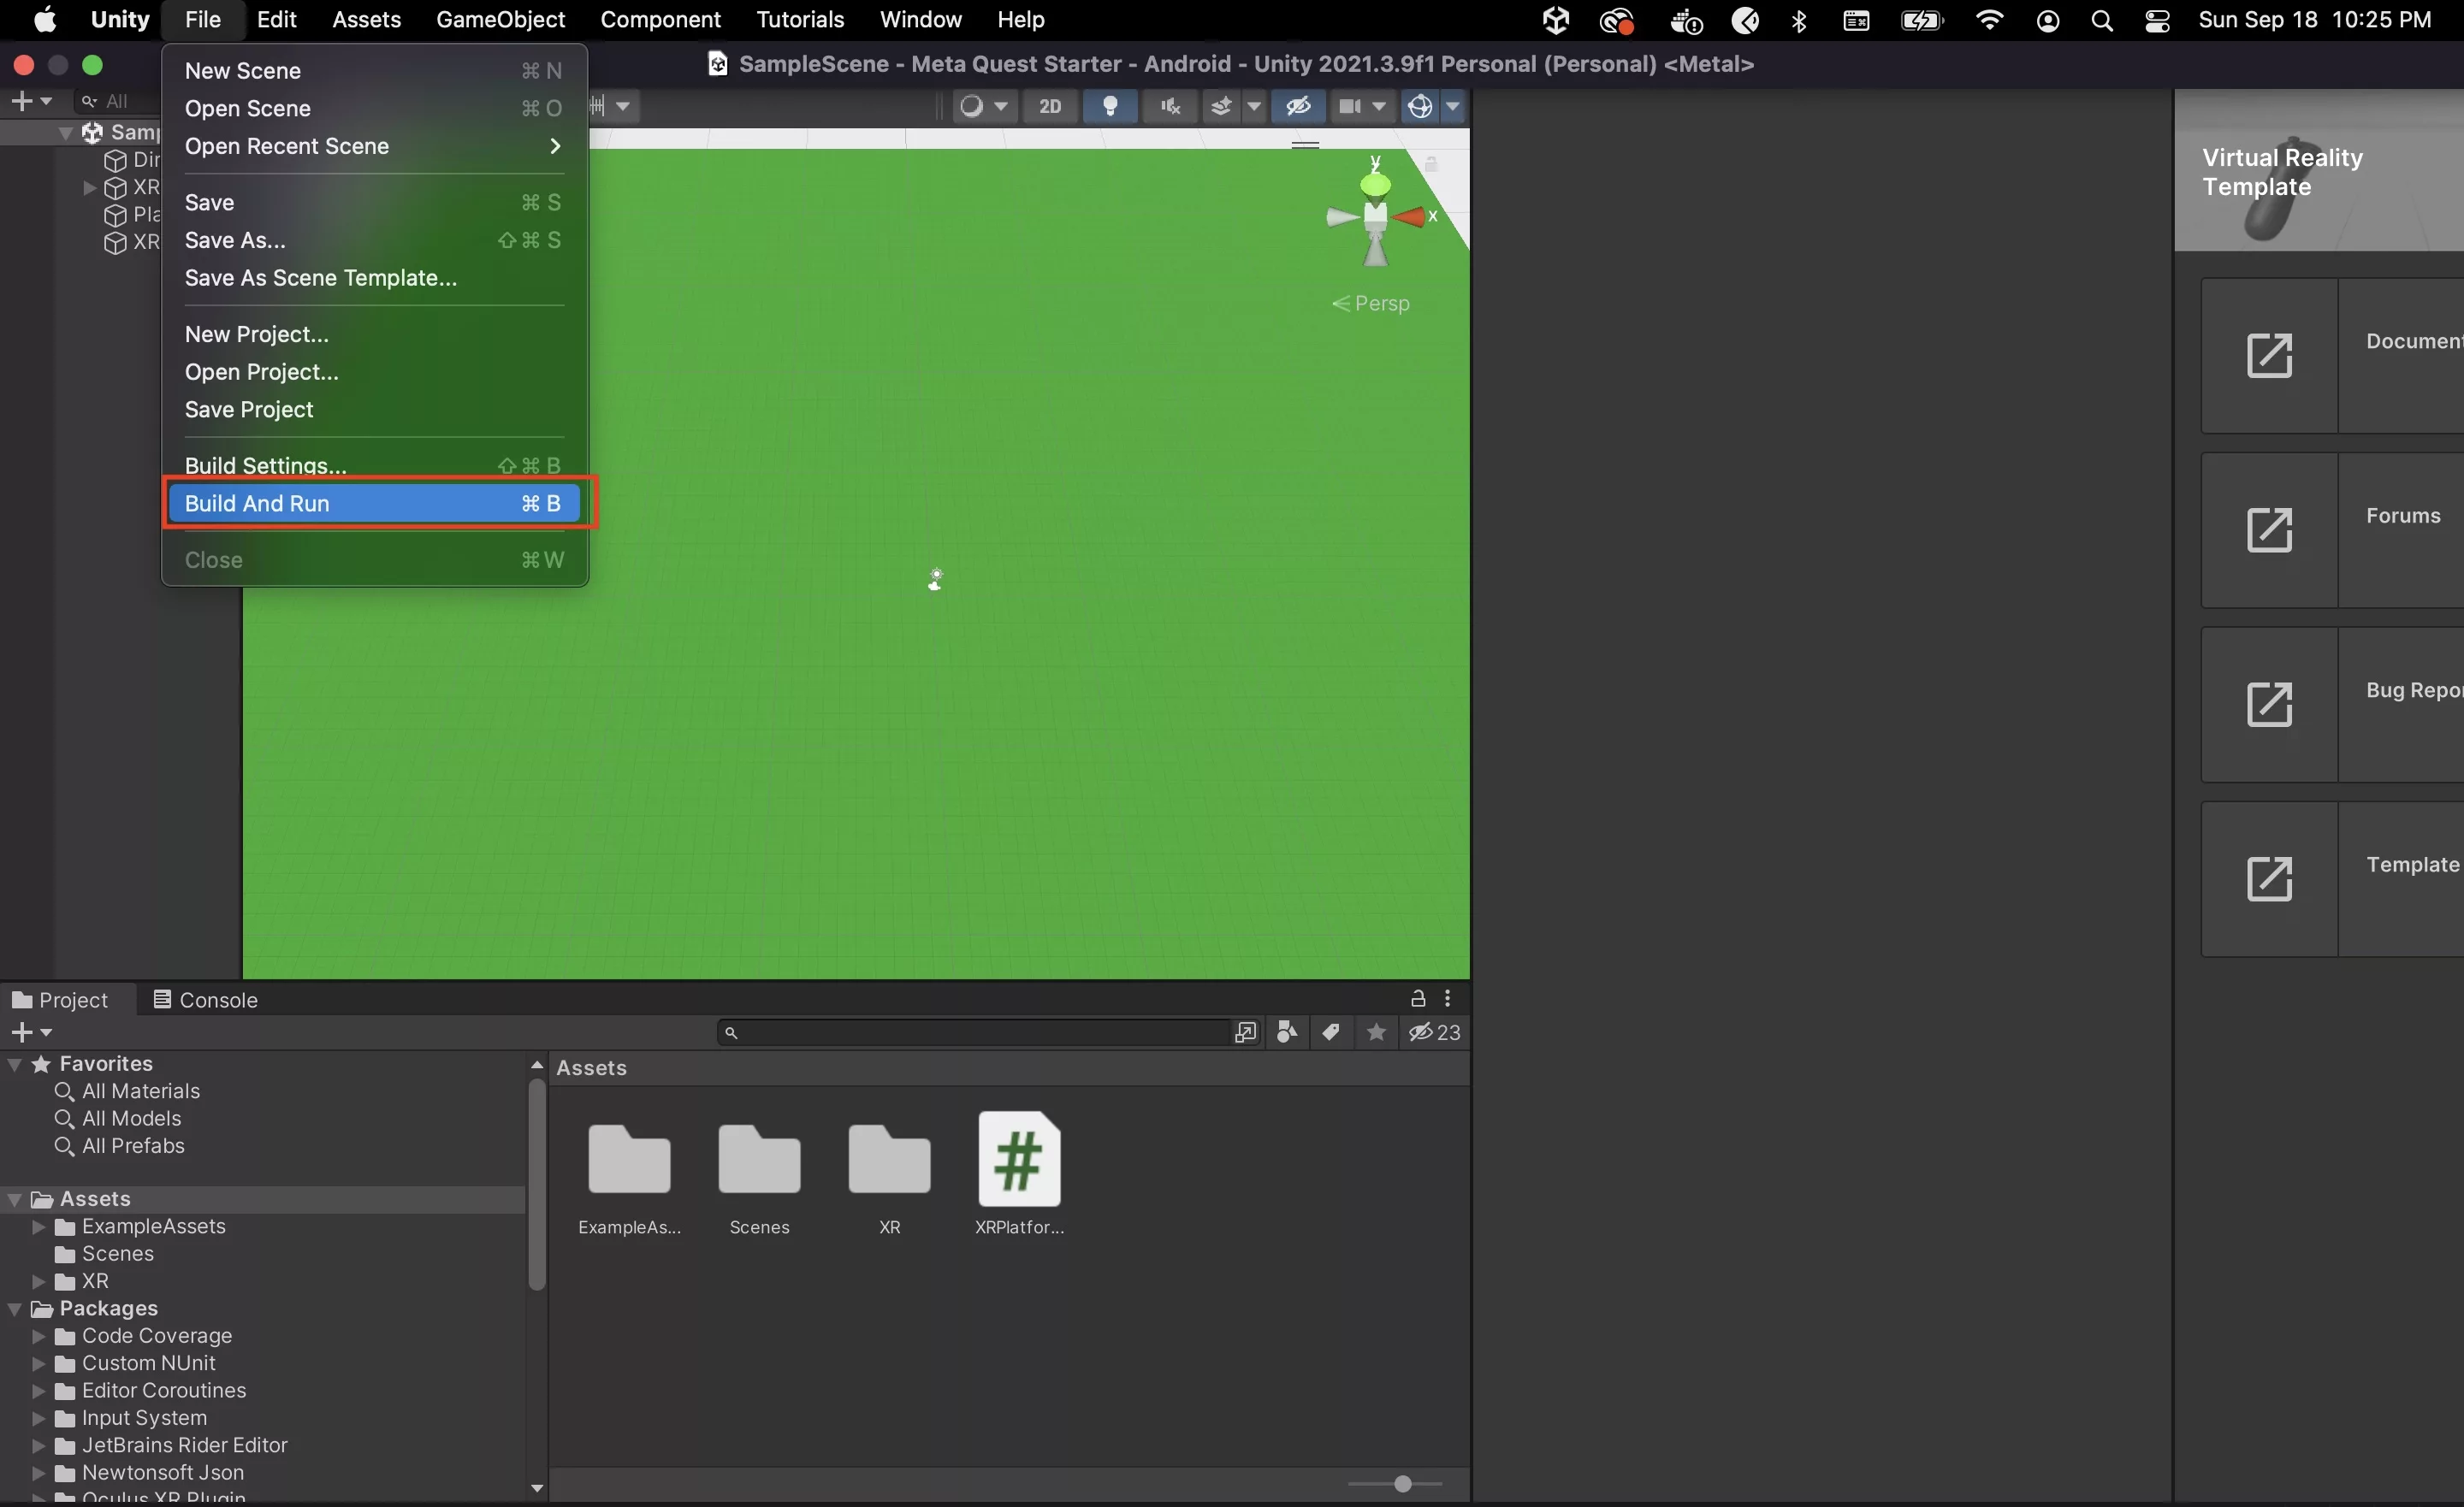 A screenshot of Unity showing you how to access Build and Run through a dropdown.